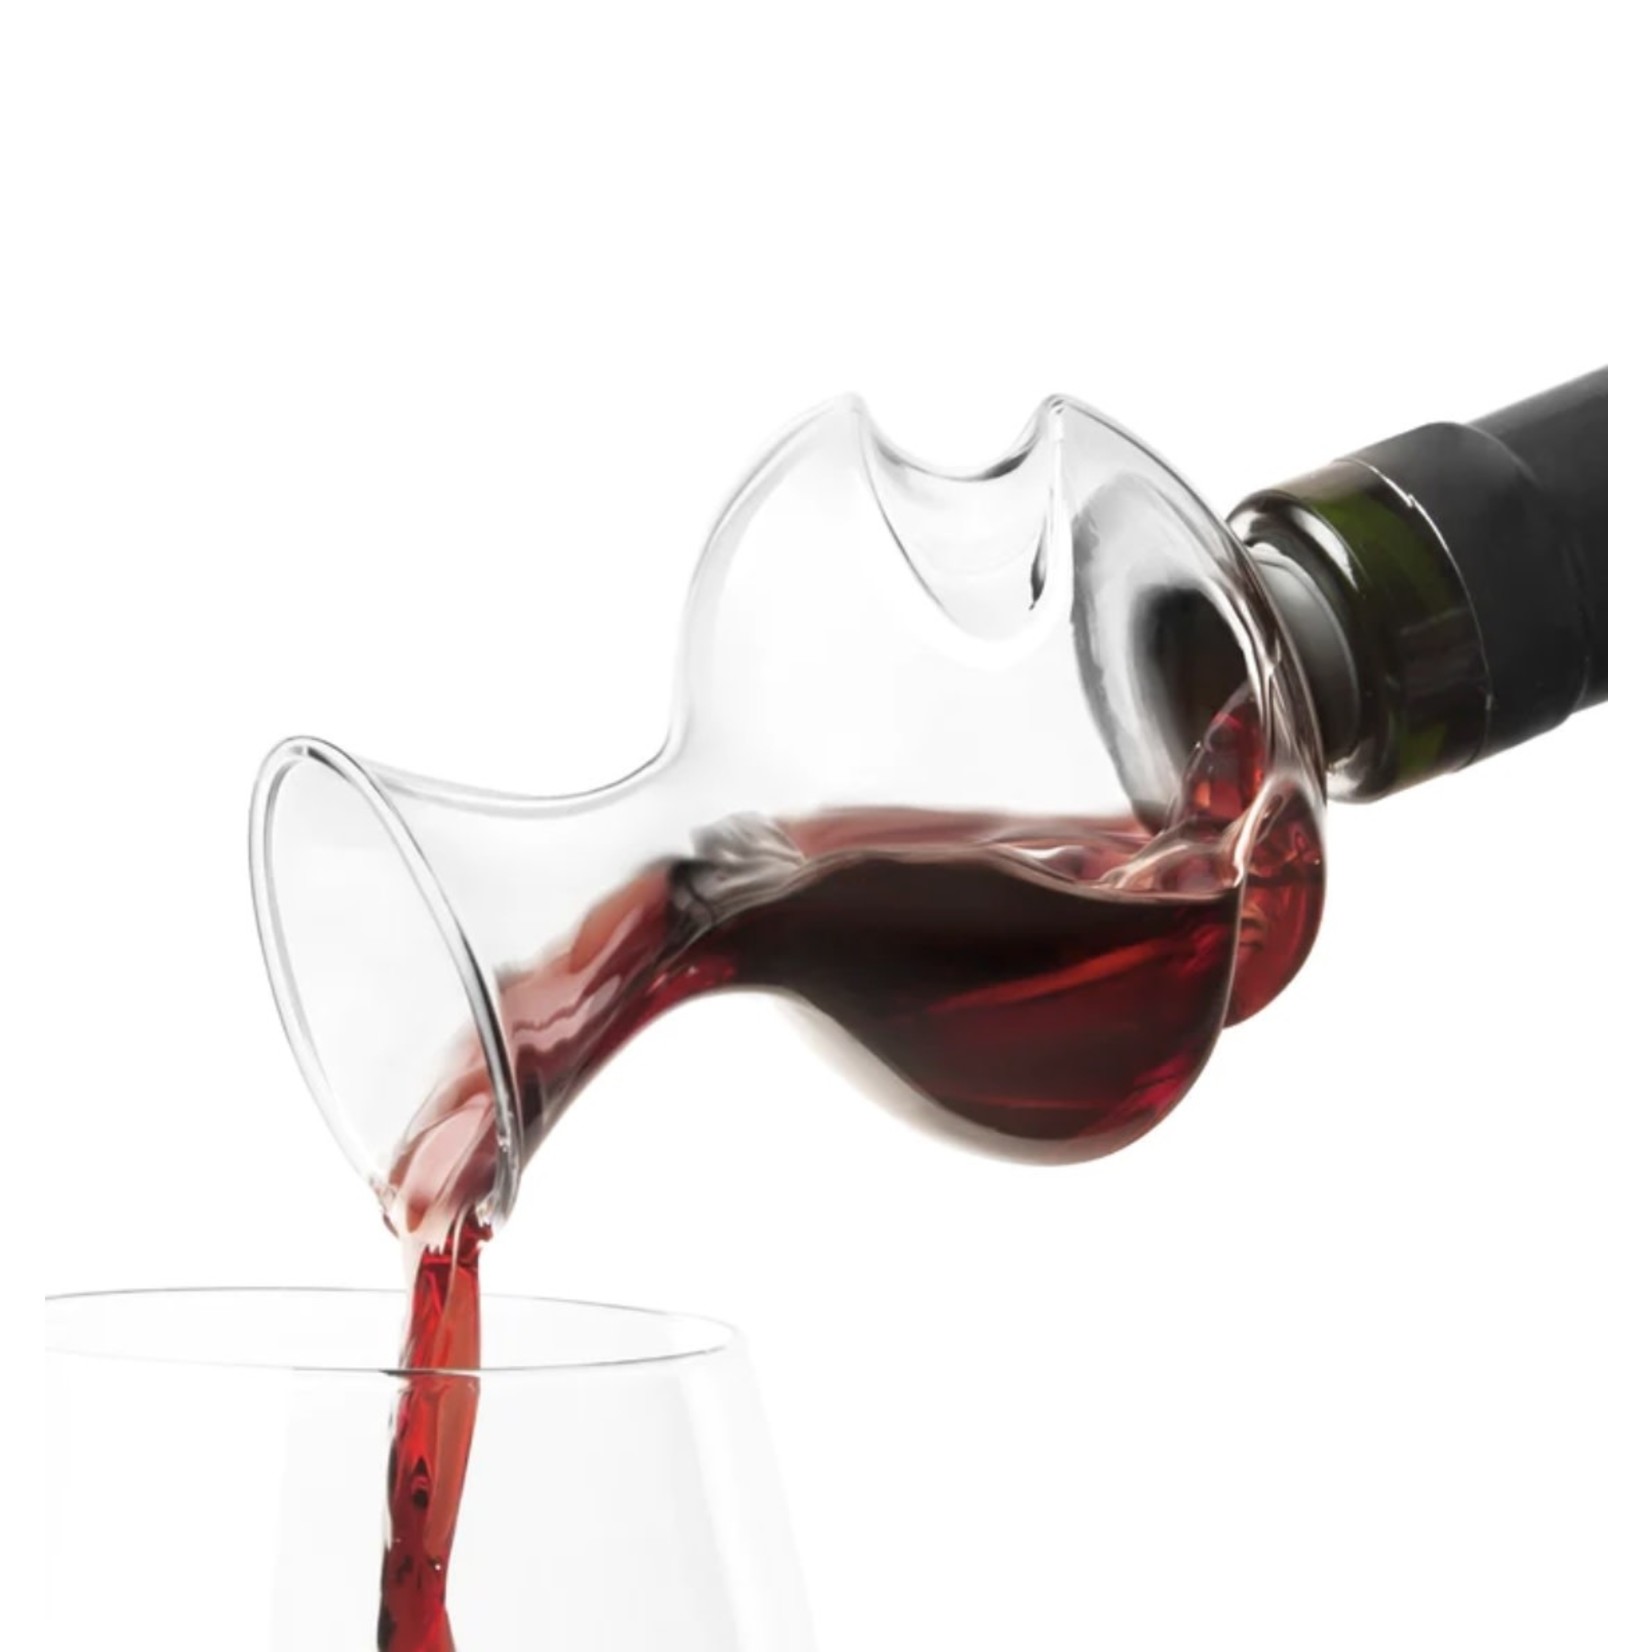 FINAL TOUCH FINAL TOUCH Experience On The Bottle Wine Aerator